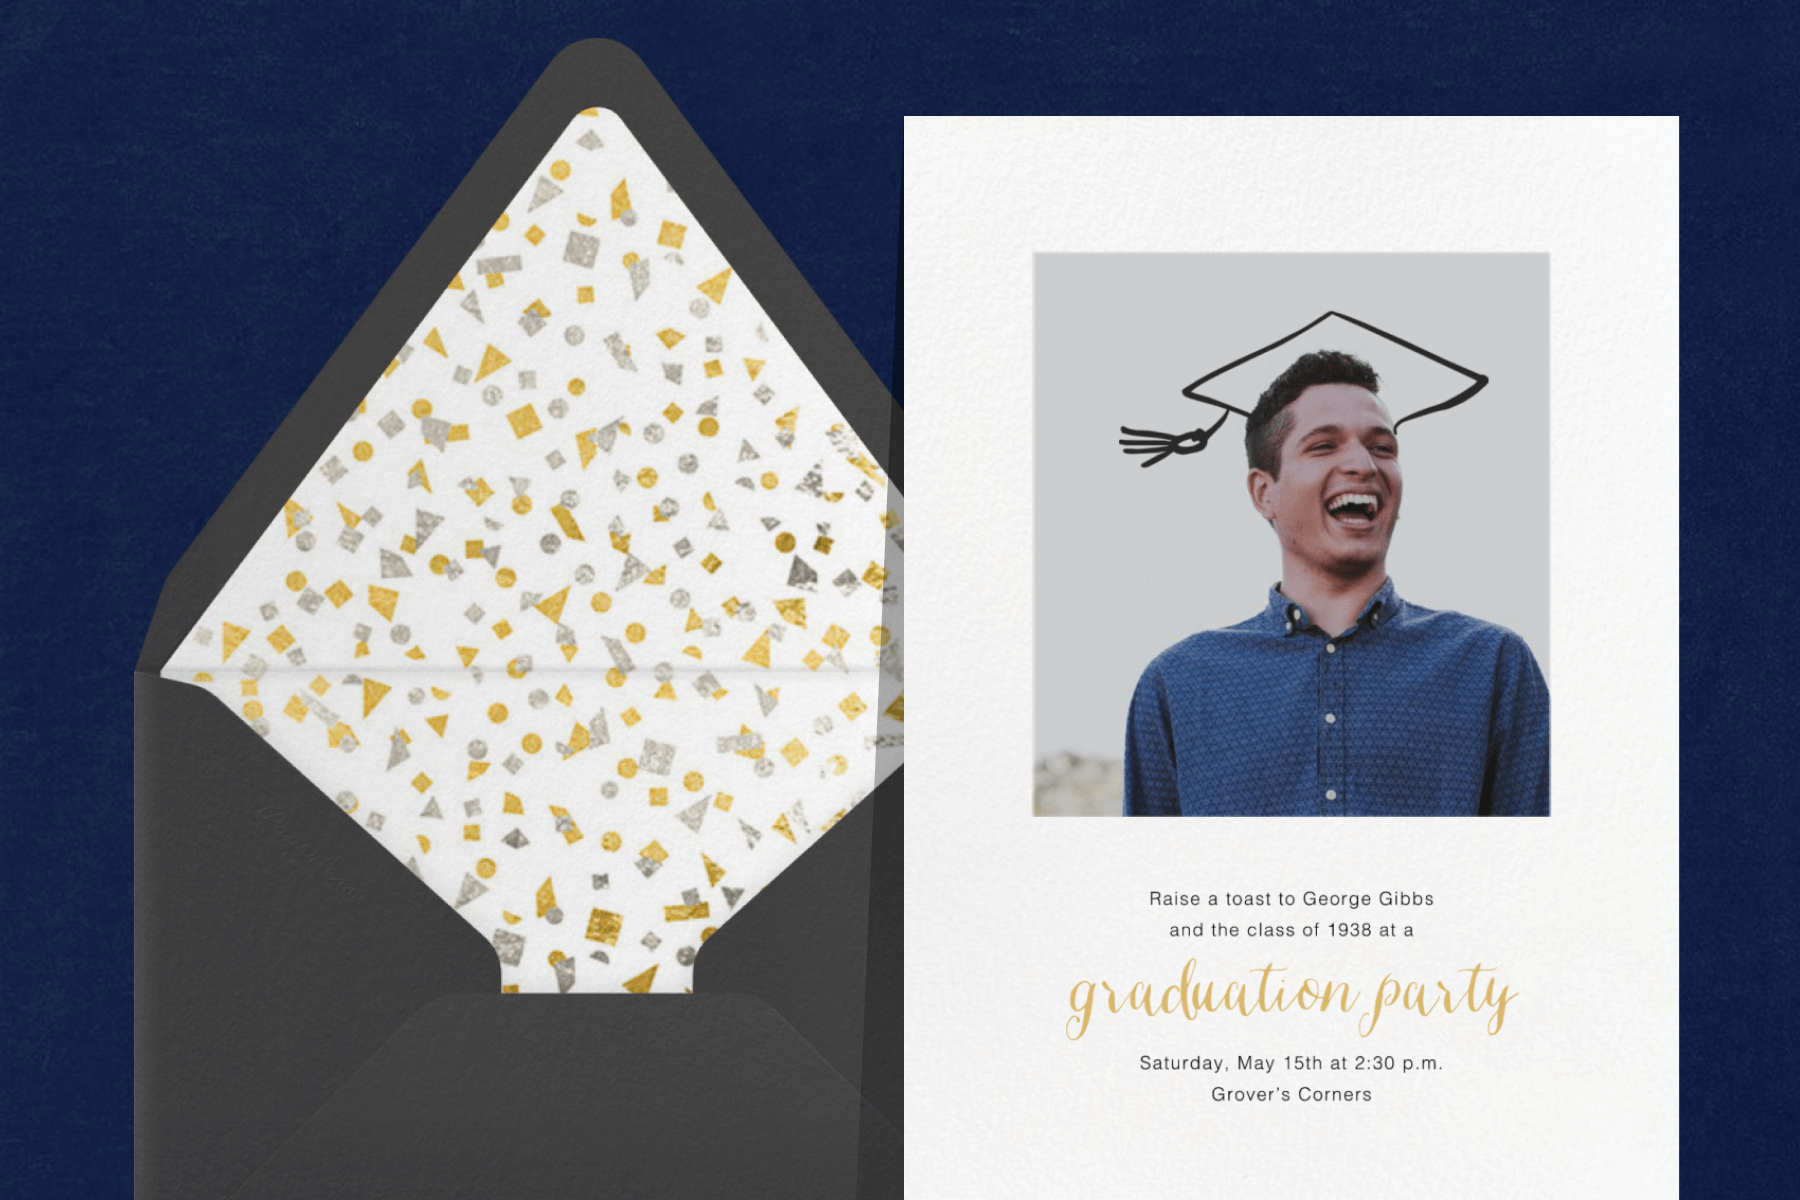 A graduation party invitation with a photo of a young man with a doodle of a mortarboard hat over his head, beside a black envelope with confetti liner on a navy background.